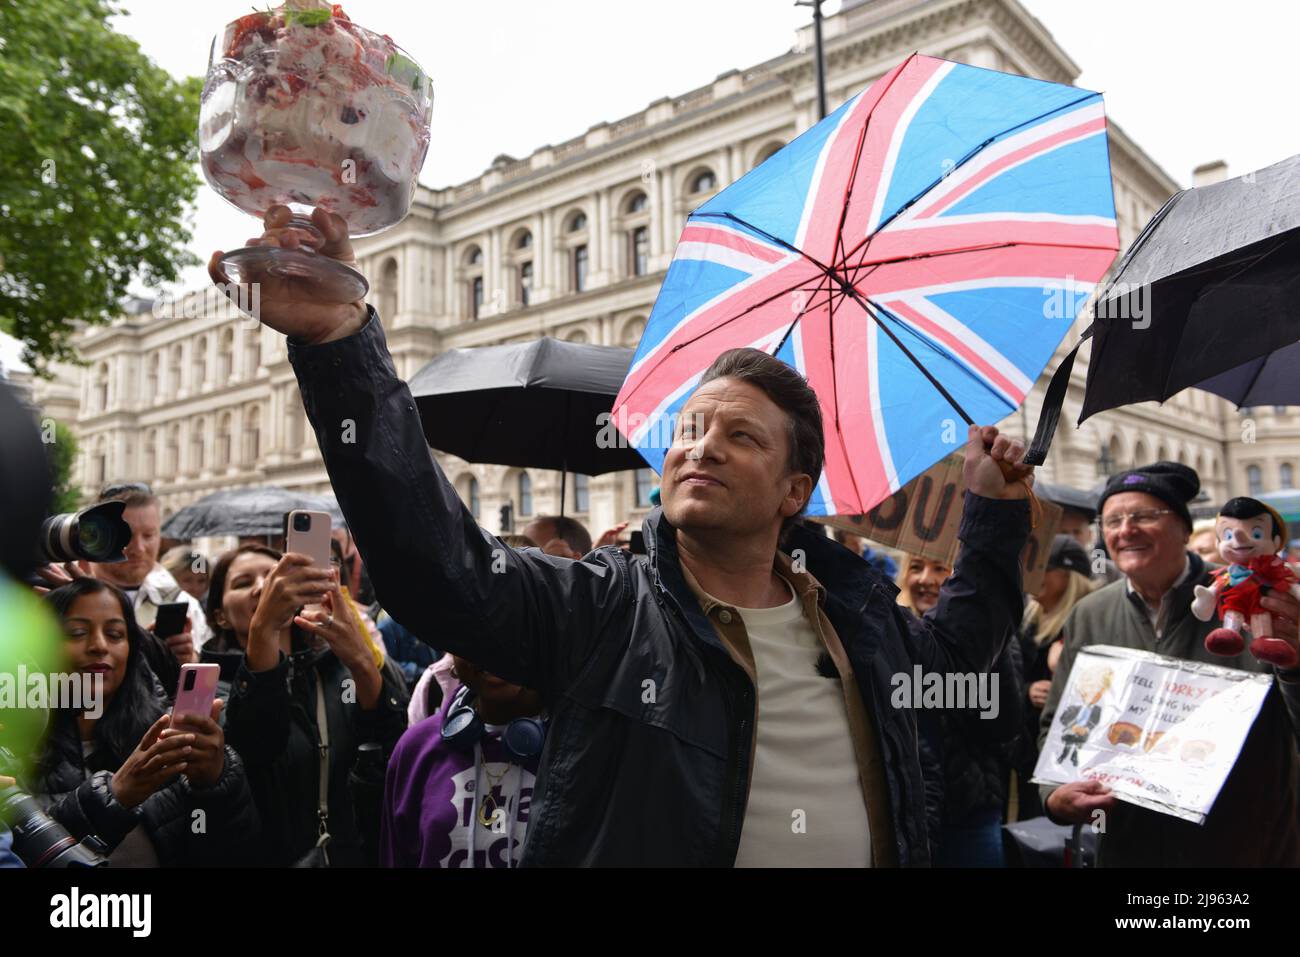 TV Chef JAMIE OLIVER protested in front of Downing Street, against government dropping an almost-implemented Obesity Law, which details banning deal promotions for unhealthy and junk foods,  as well as limiting their TV advertisements. The protest's name, 'Eton Mess', references a dessert believed to have originated from Boris Johnson's place of education, Eton College. Stock Photo